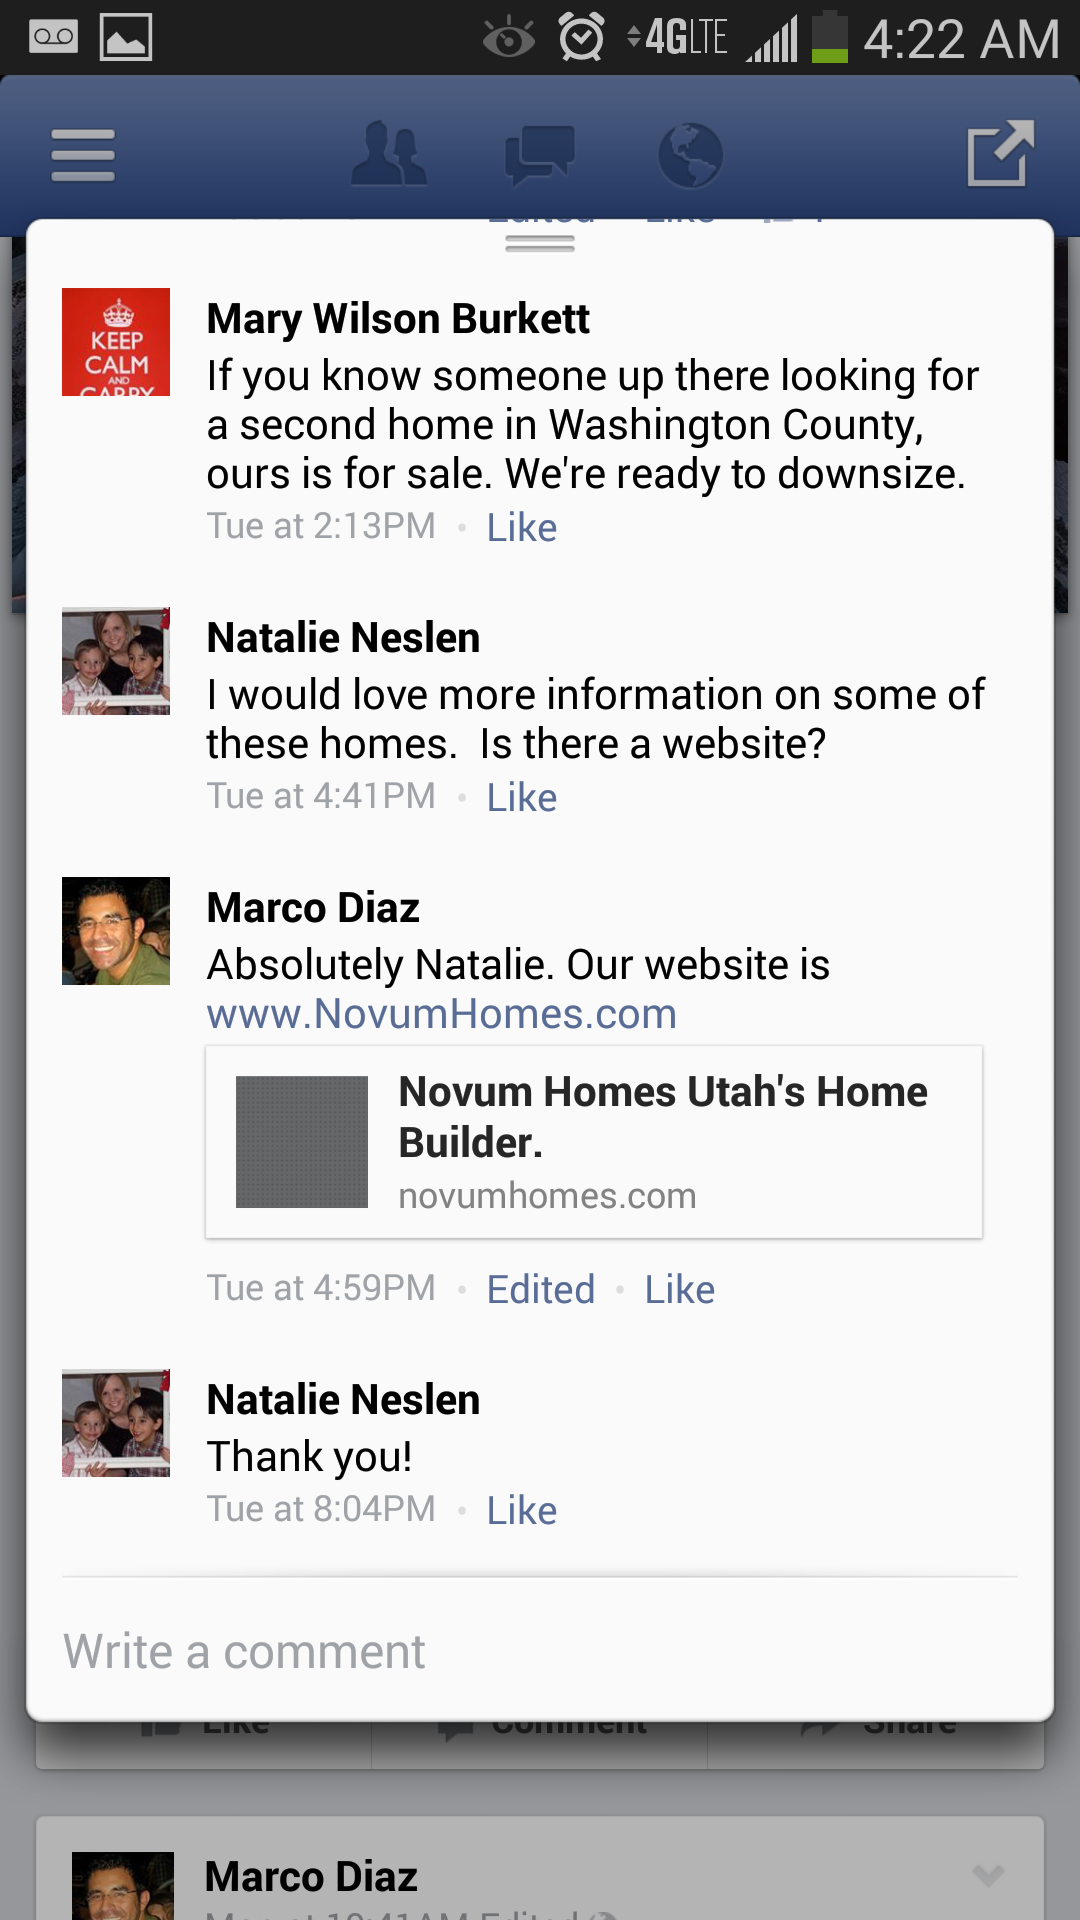 Fb screen shot from Marco Diaz giving Novum Homes as the Web site for info on the home he built